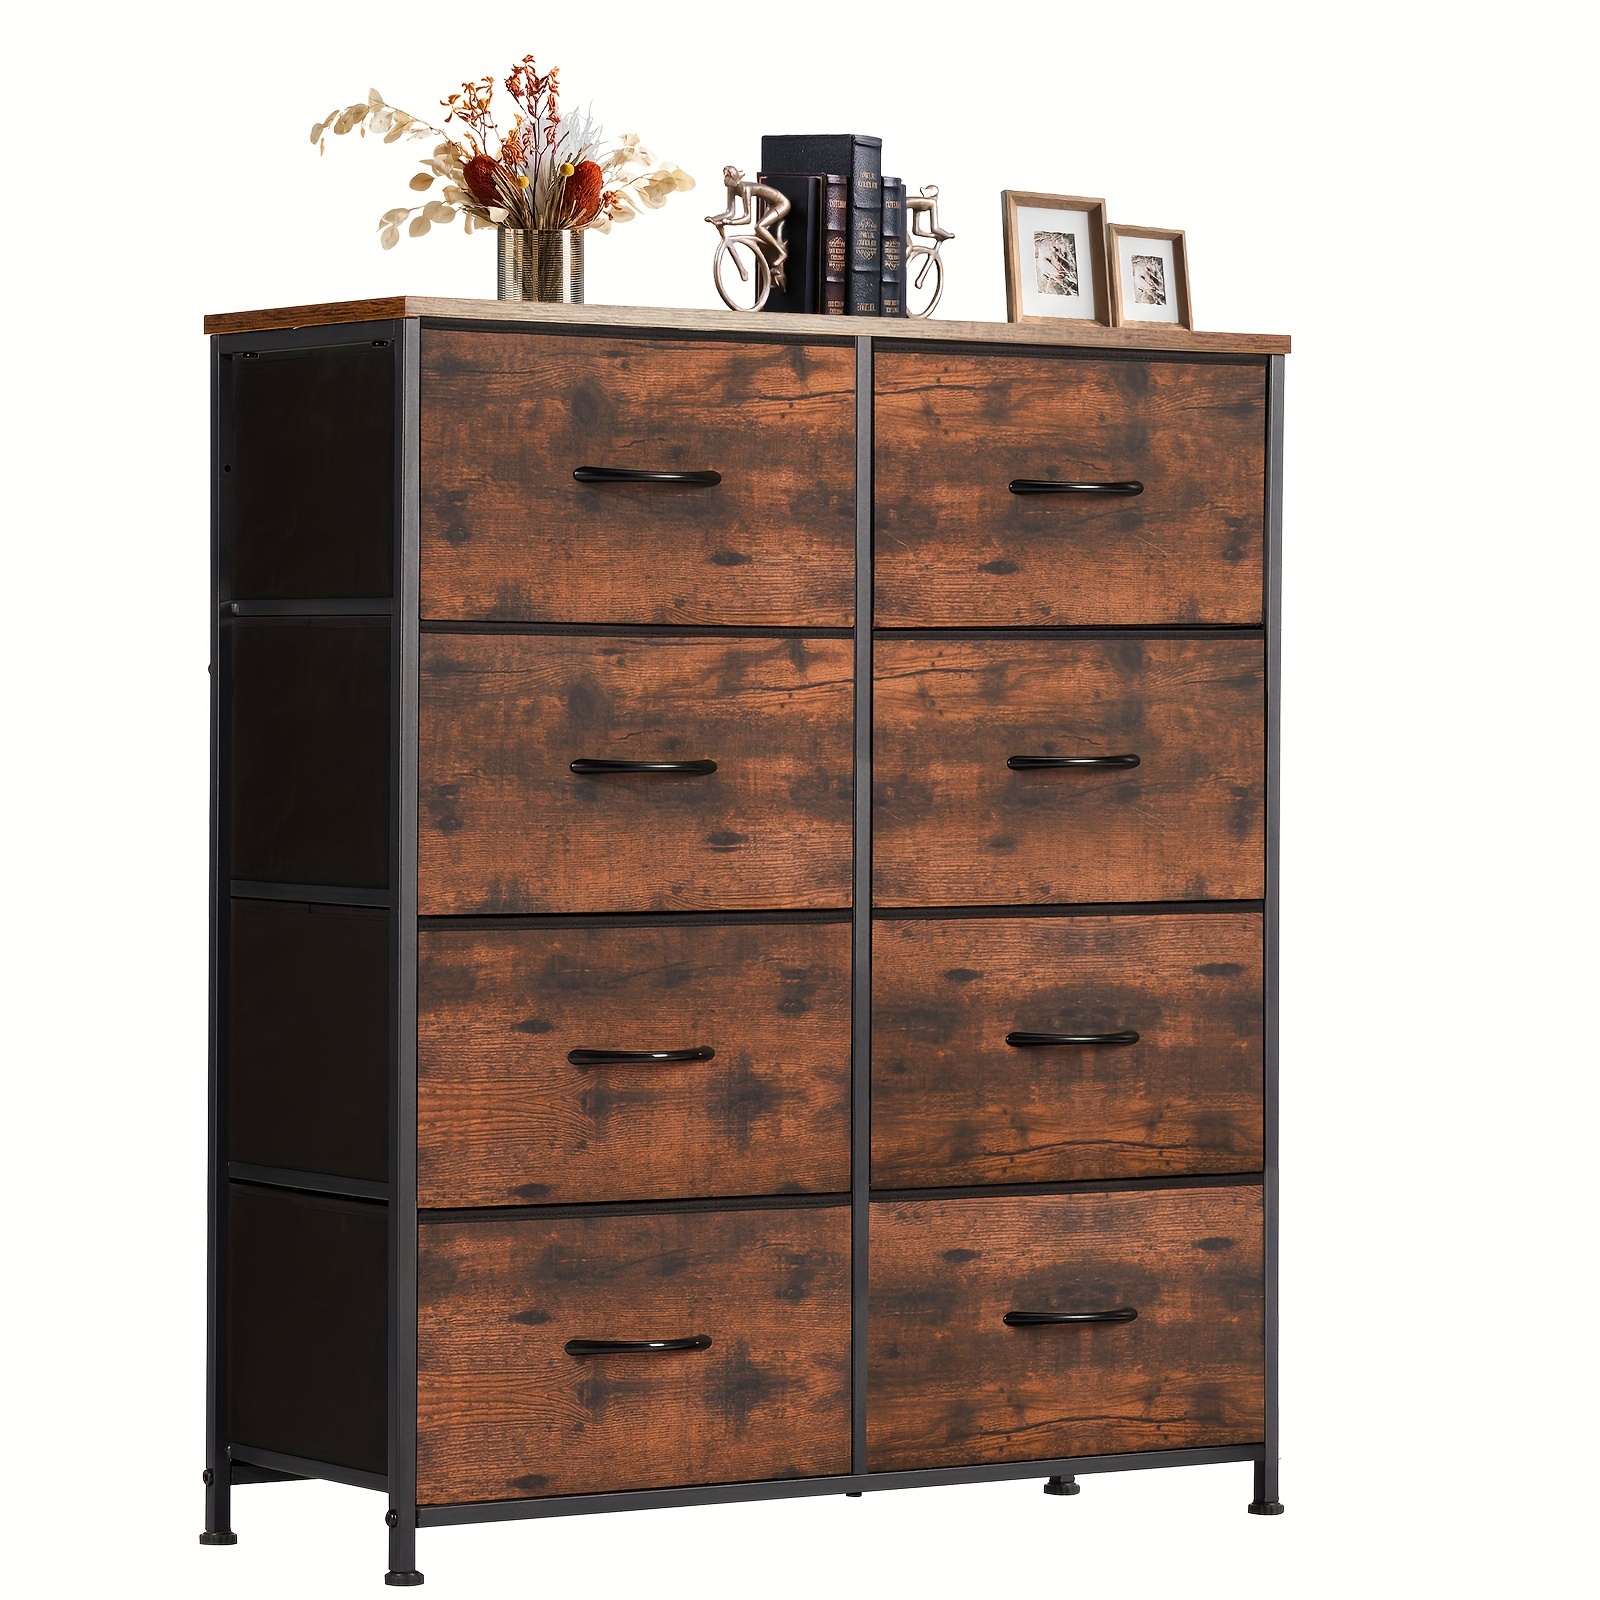 

1pc Dresser For Bedroom With 8 Fabric Drawers, Tall Storage Cabinet, Organizer Sideboards Cabinet For Clothing Closet, Room Furniture, With Steel Frame, Wood Top, Lightweight Quick Assemble Cabinet